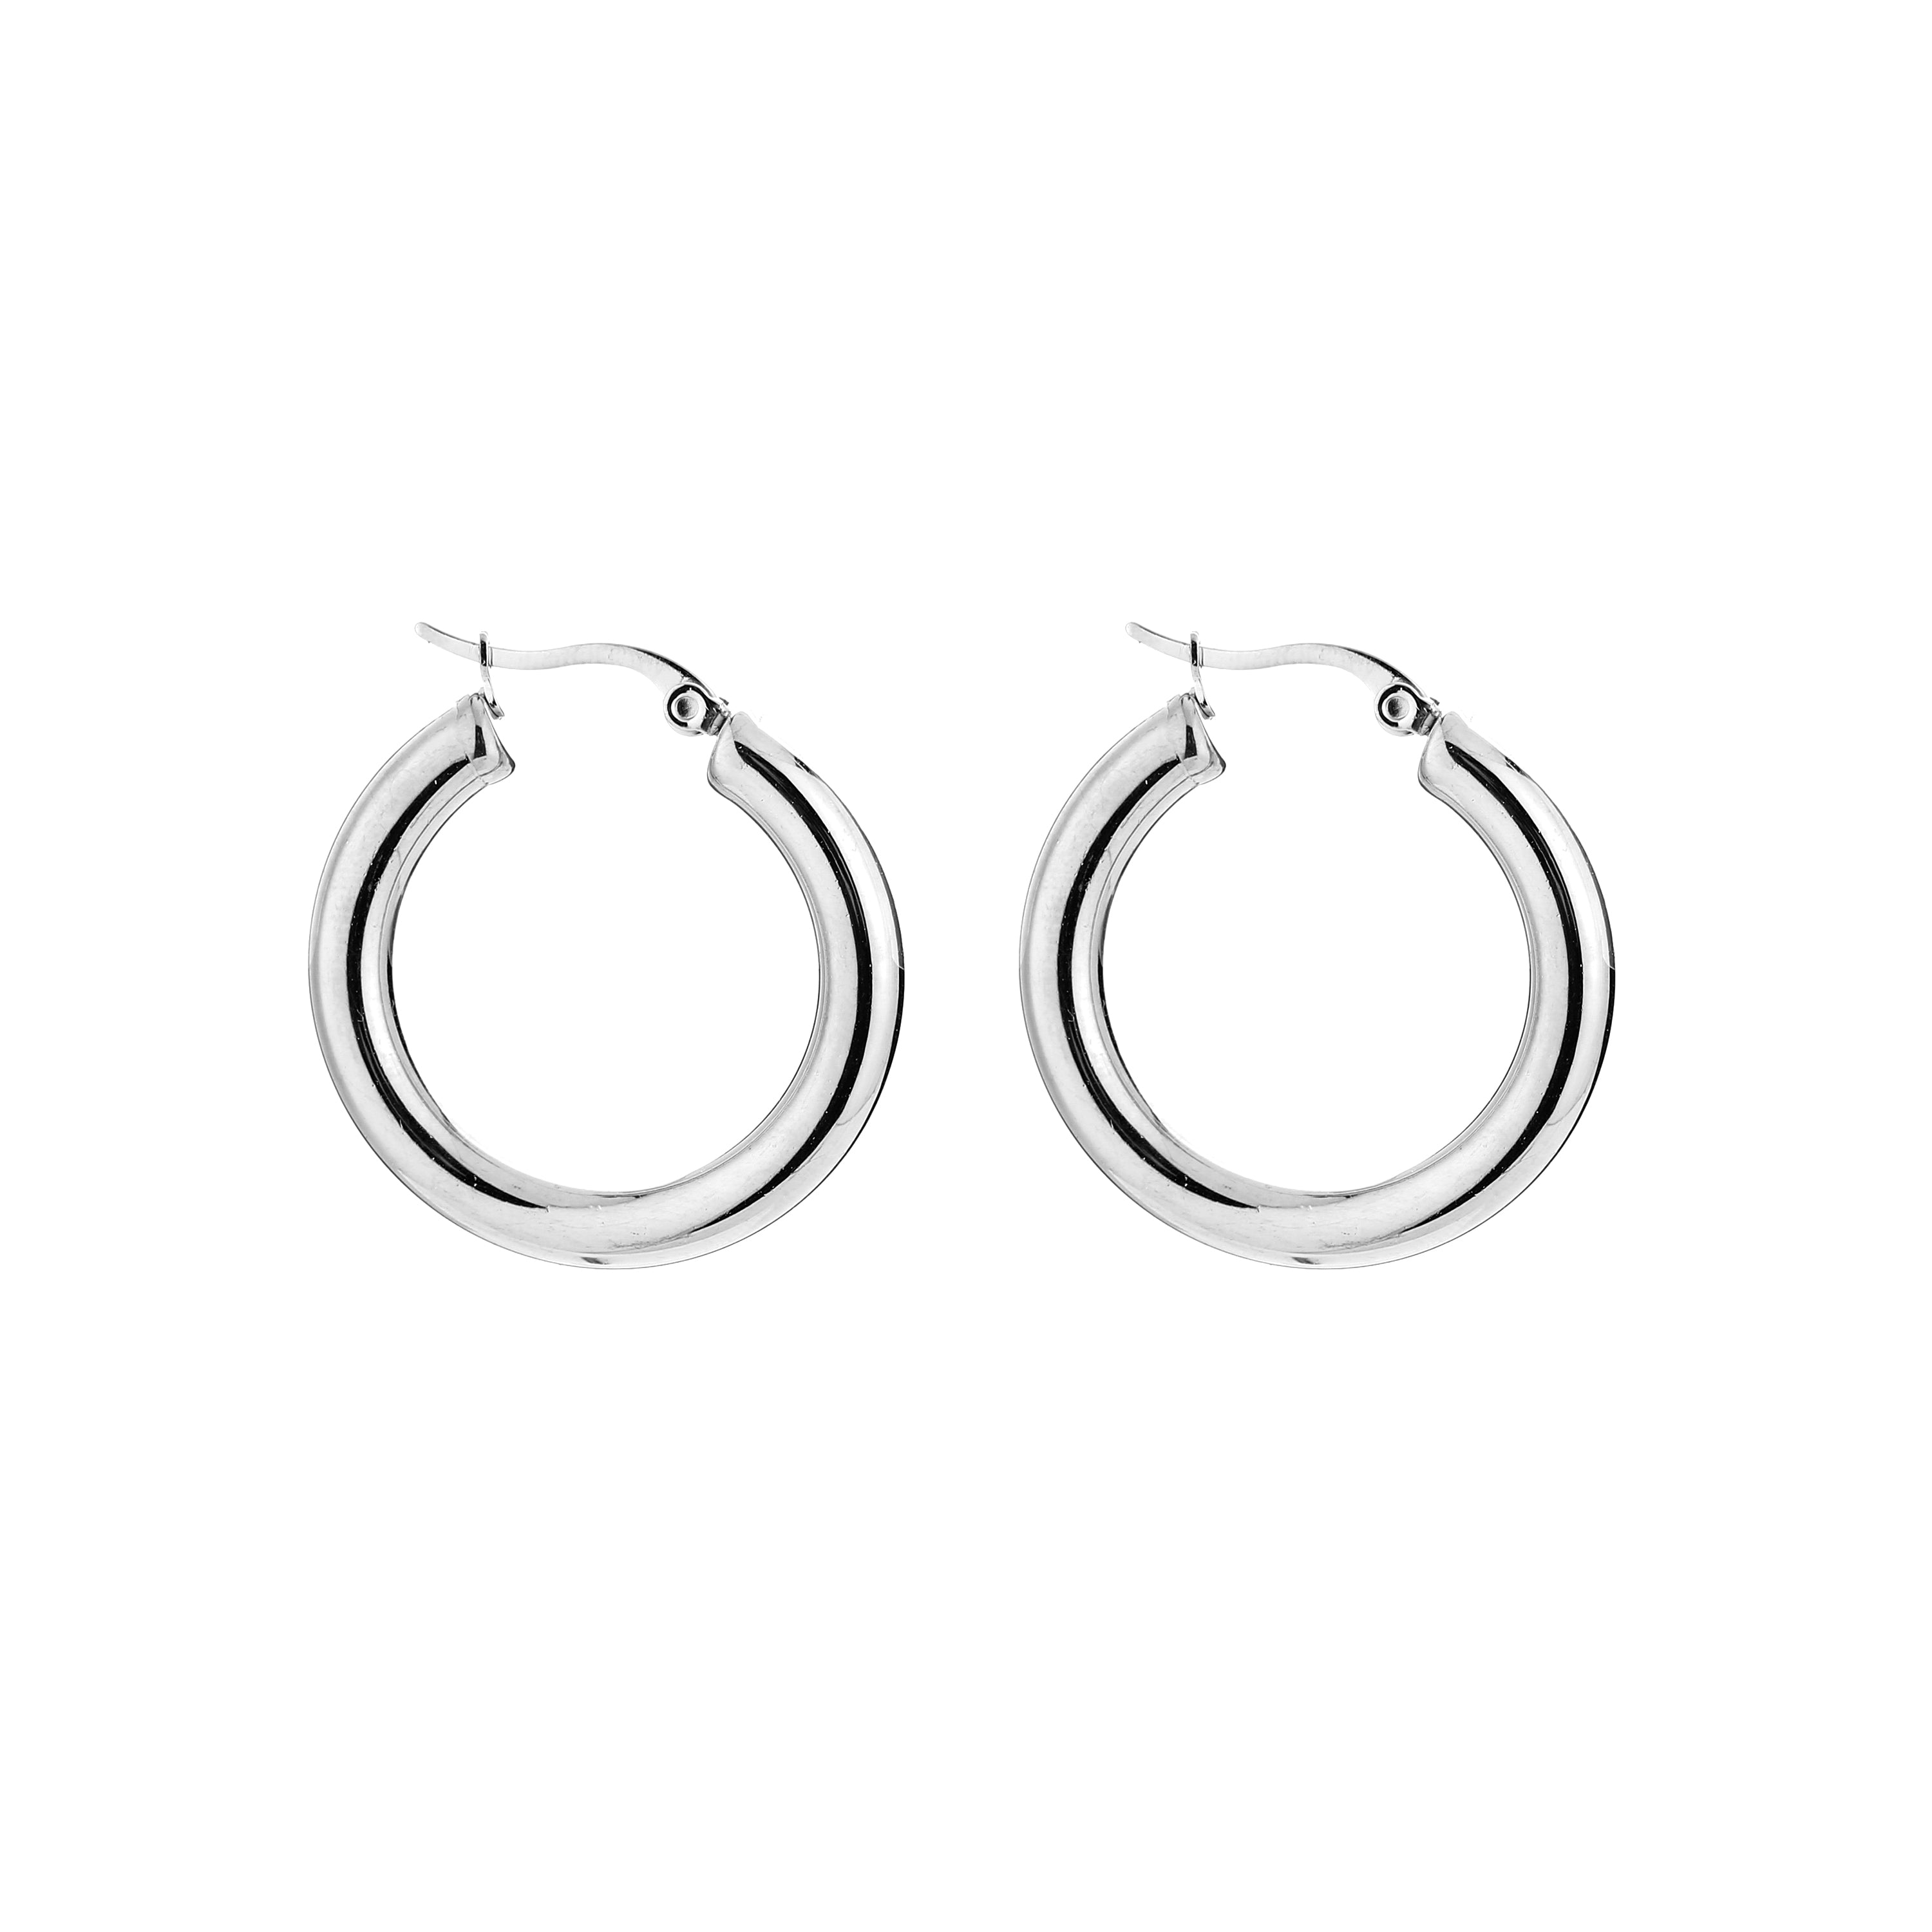 ♥︎PERFECT HOOPS - My Favourites